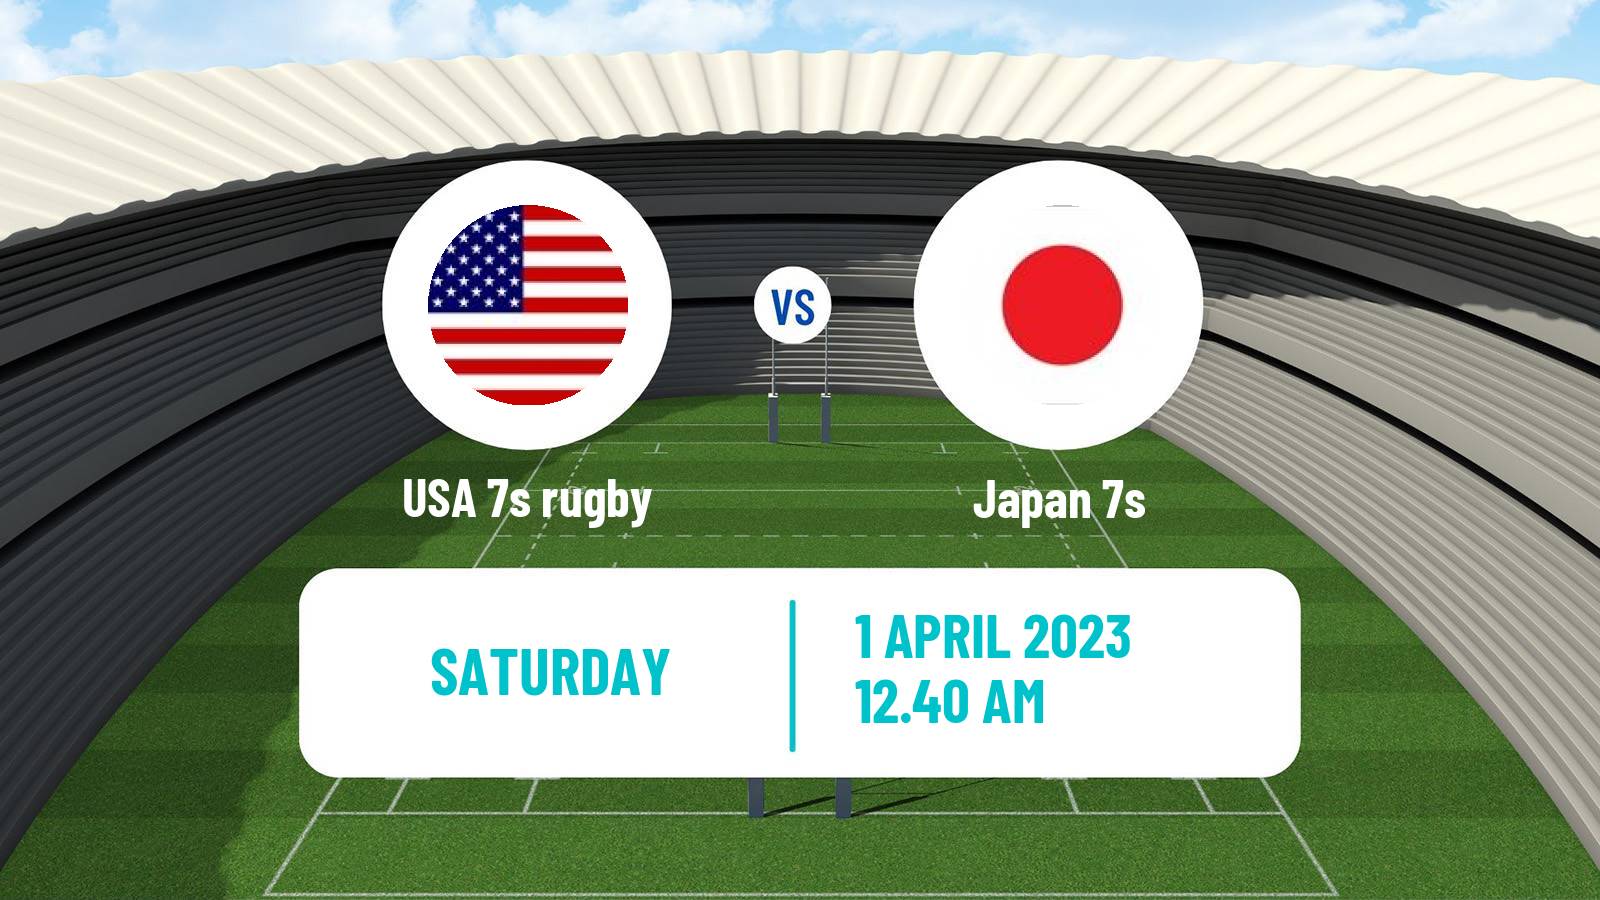 Rugby union Sevens World Series - Hong Kong 2 USA 7s - Japan 7s